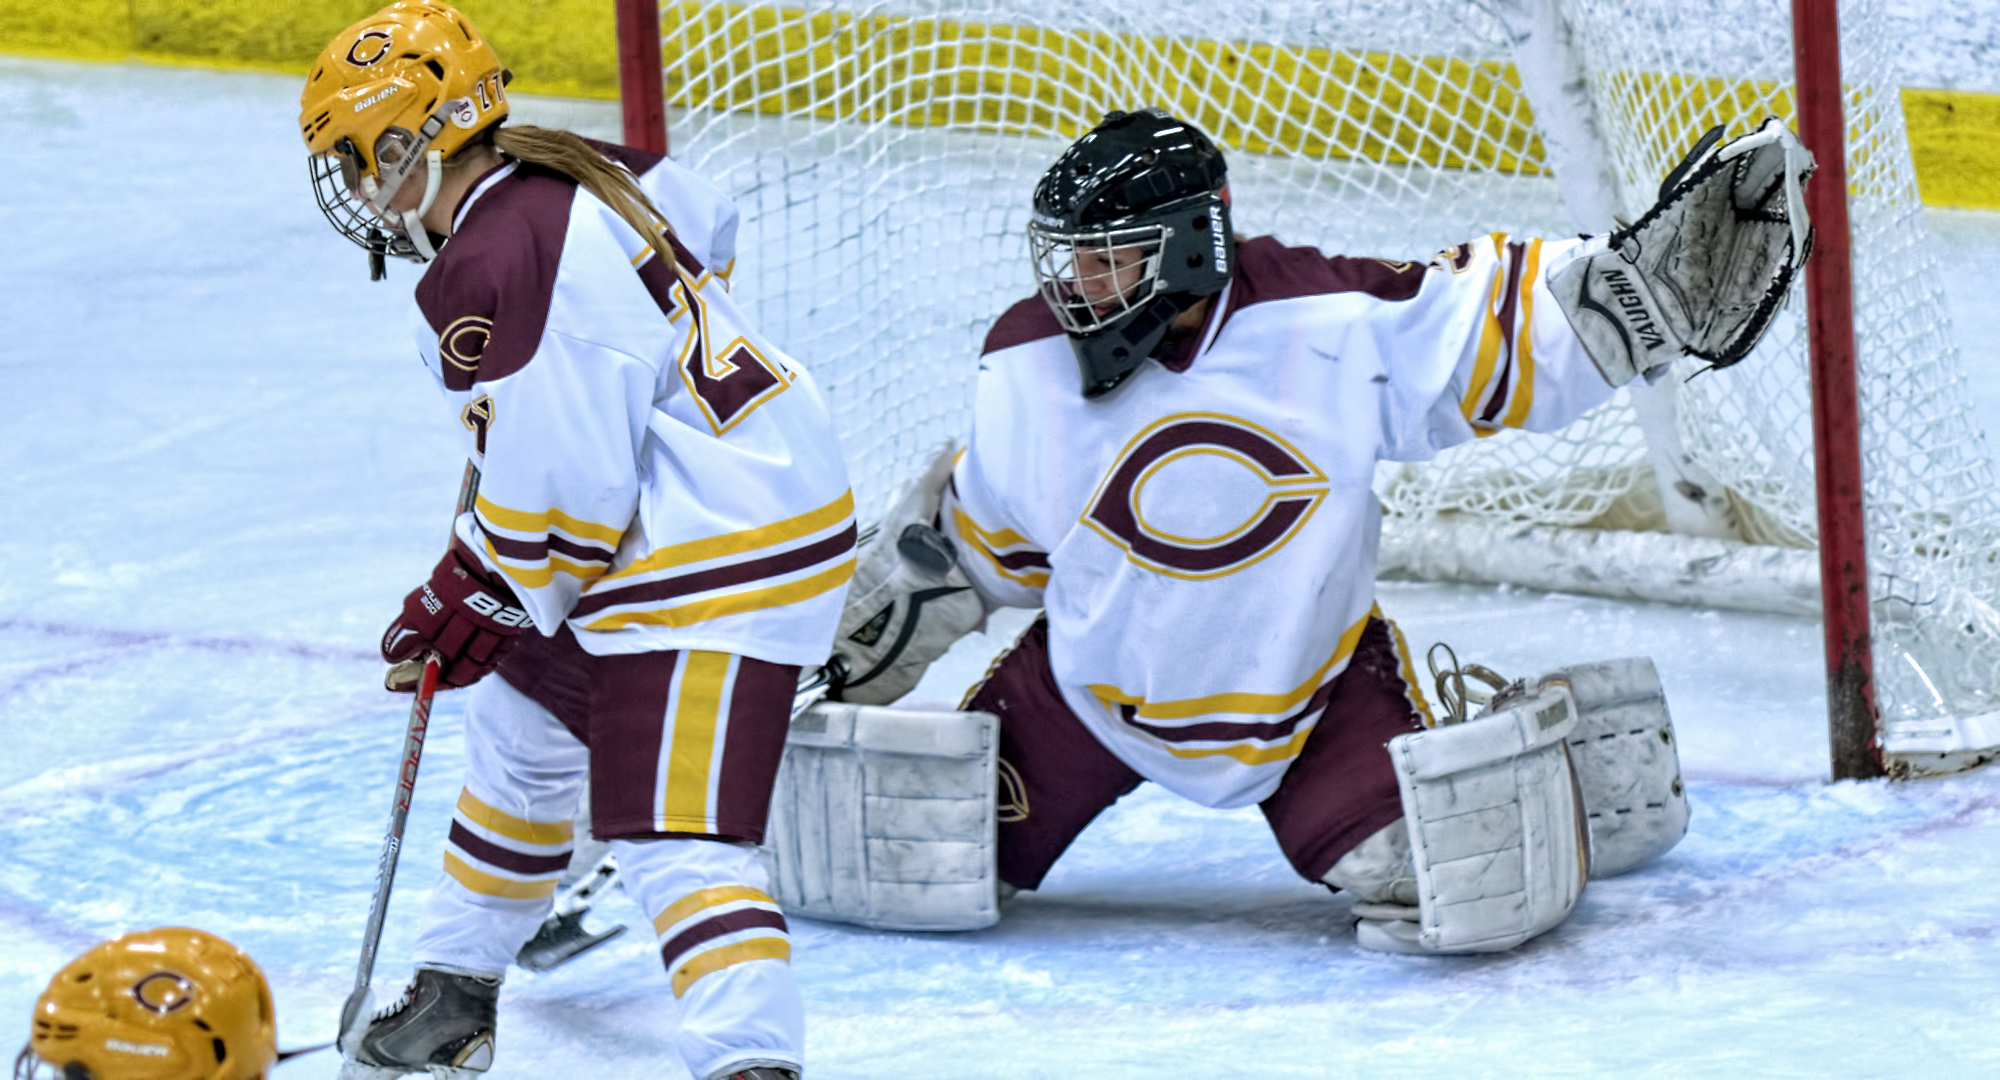 Brittany Boss made 23 saves in the Cobbers' 5-3 win over St. Catherine in the MIAC opener.